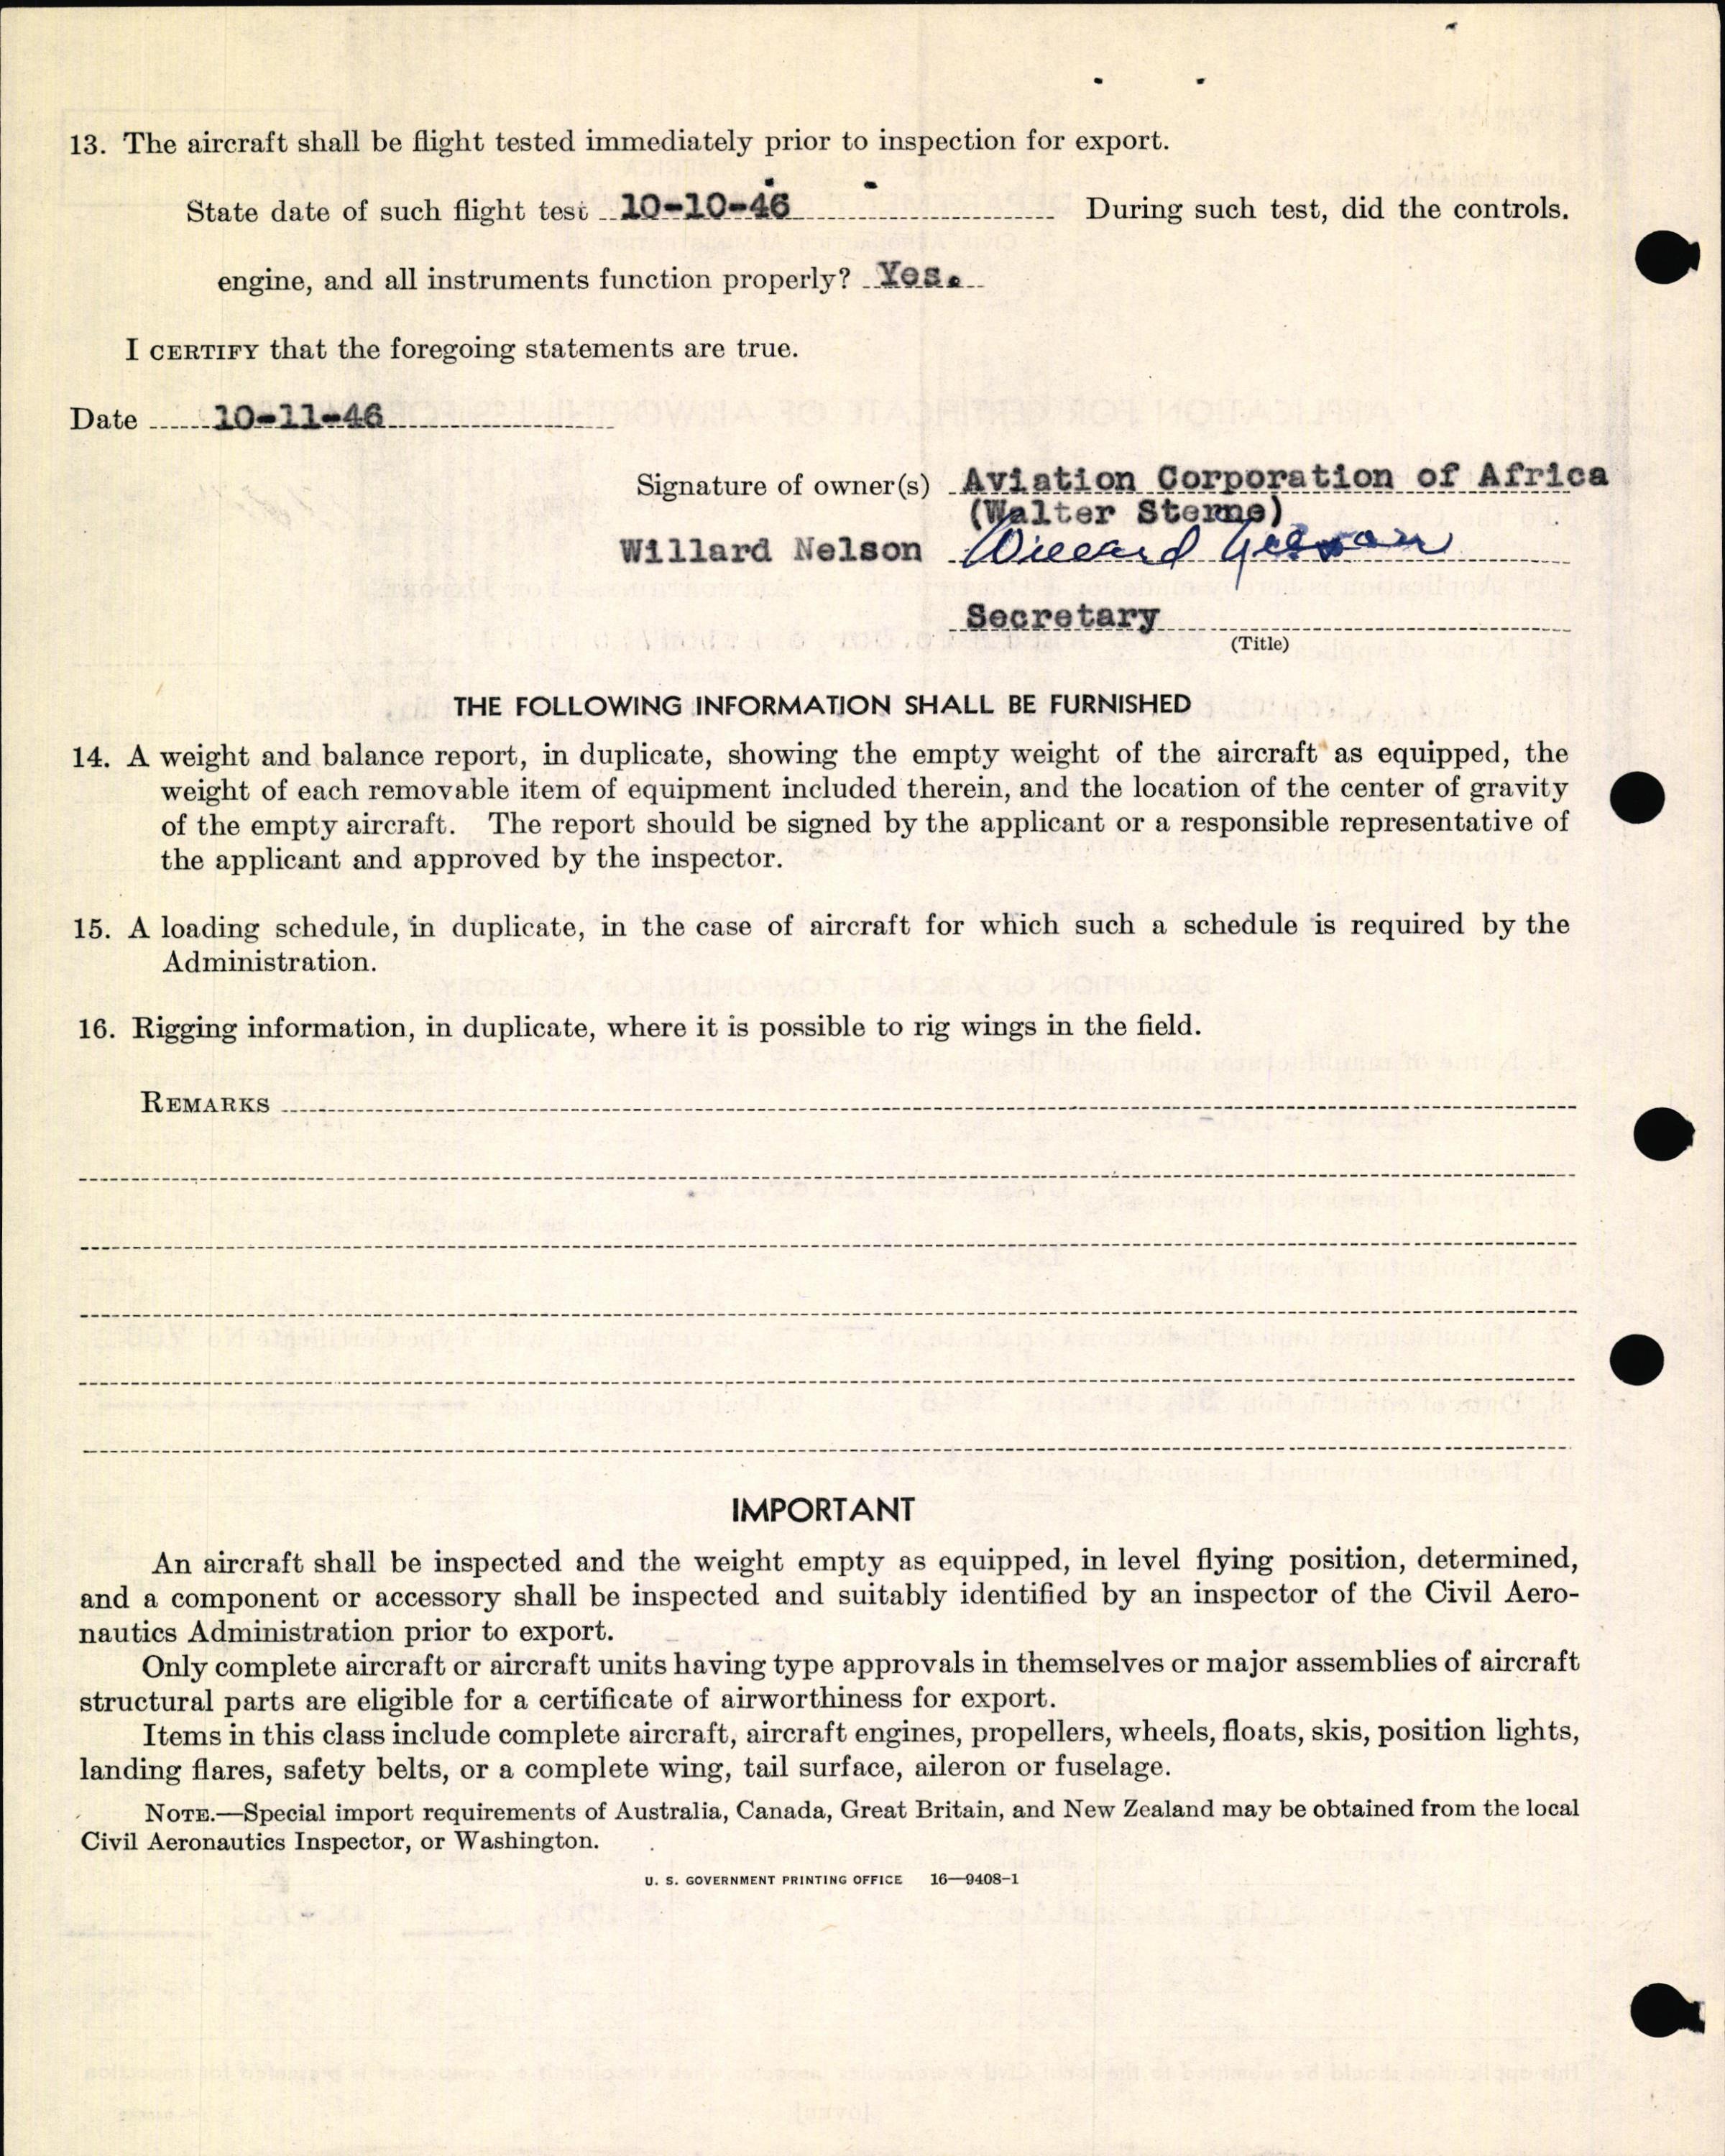 Sample page 6 from AirCorps Library document: Technical Information for Serial Number 1268